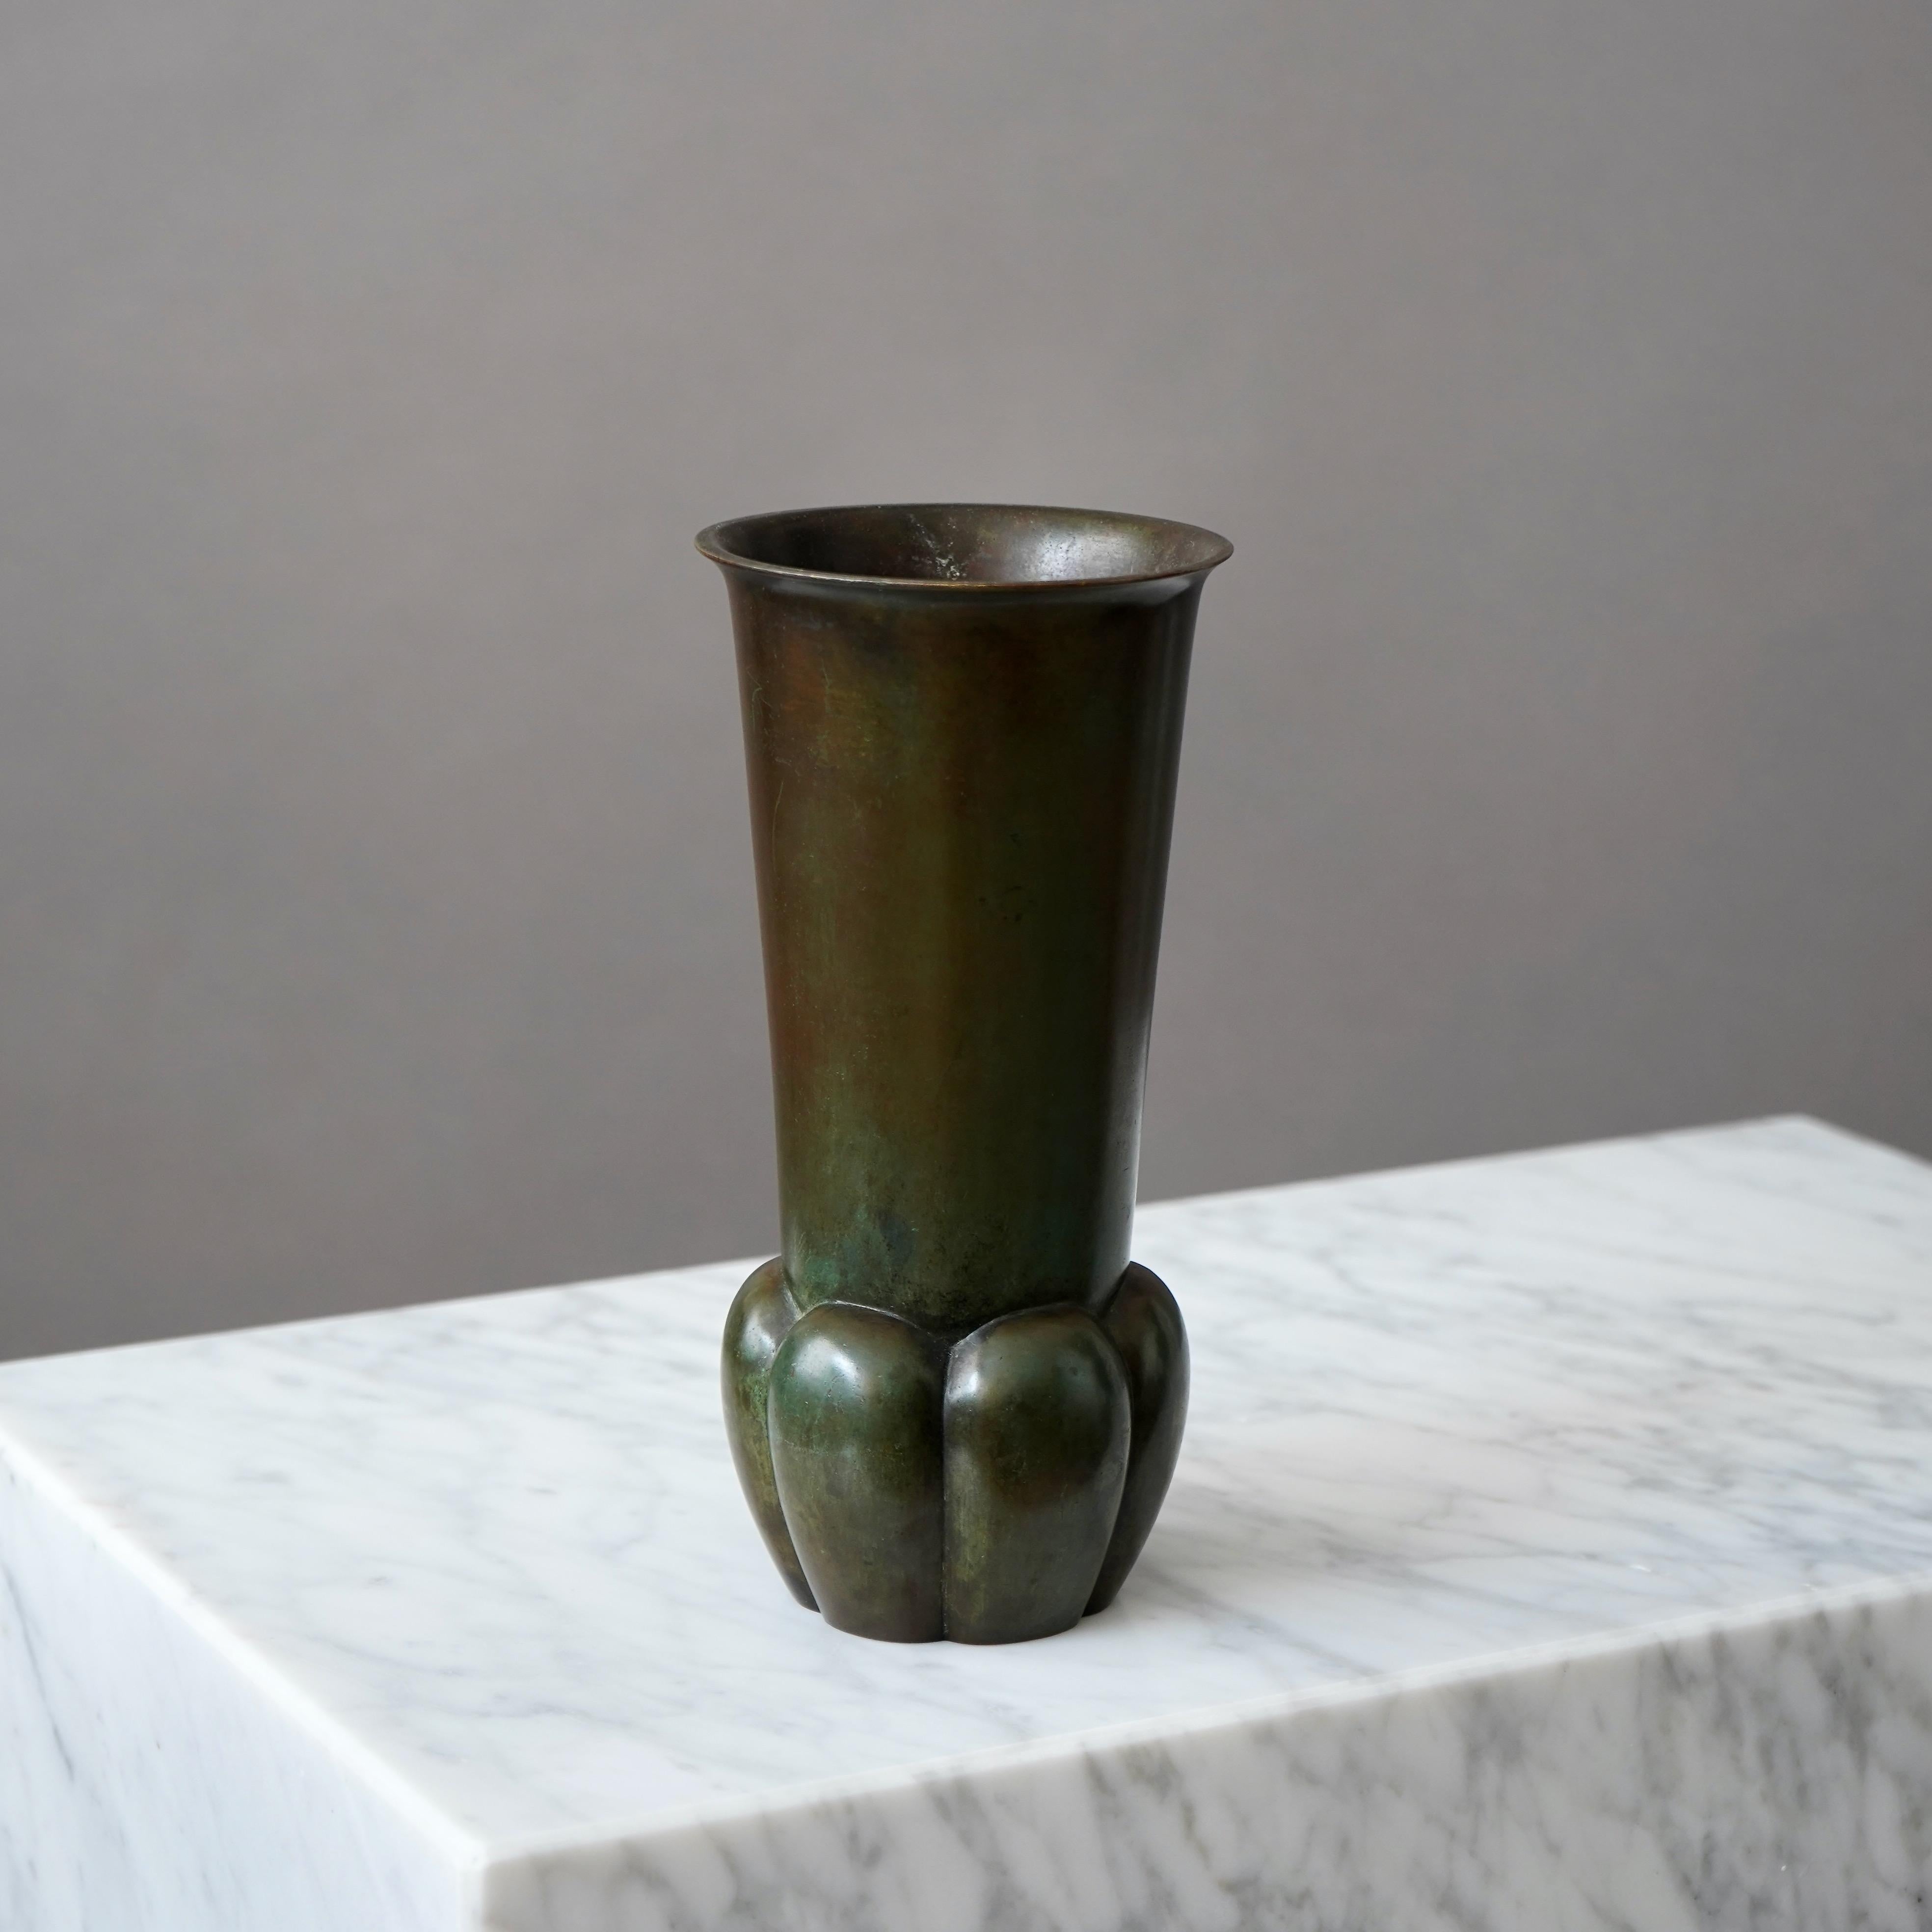 A beautiful bronze vase with amazing patina. 
Made by GAB Guldsmedsaktiebolaget, Sweden, 1930s.  

Excellent condition.
Stamped 'BRONS' and makers mark.